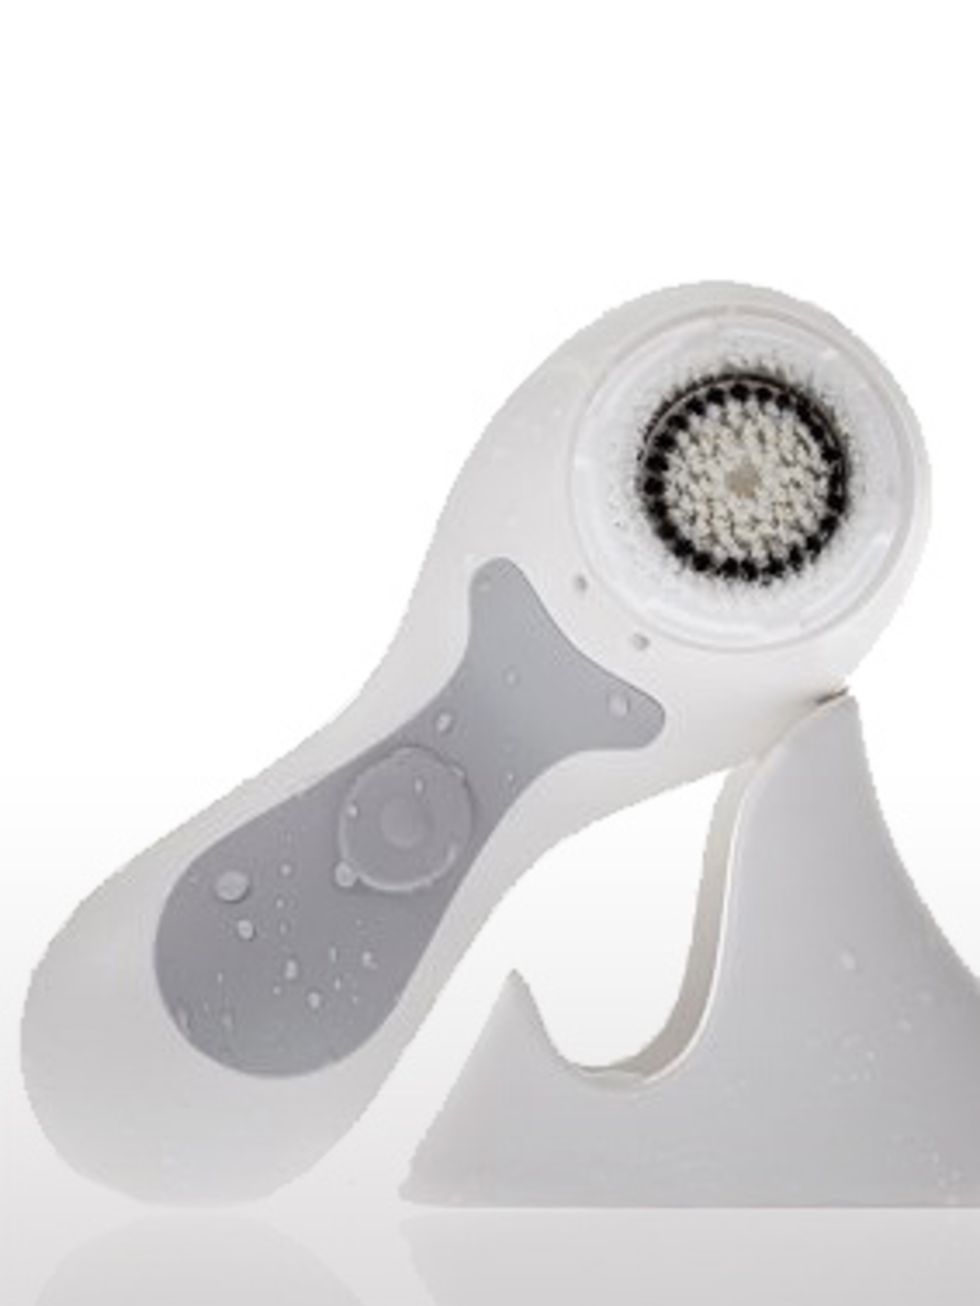 <p>Working in much the same way as an electric tooth brush  but for the skin - the Clarisonic Skincare Brush, £146.81, vibrates at a frequency of more than 300 movements per second, for a cleanse that is twice as effective as washing your face by hand. I